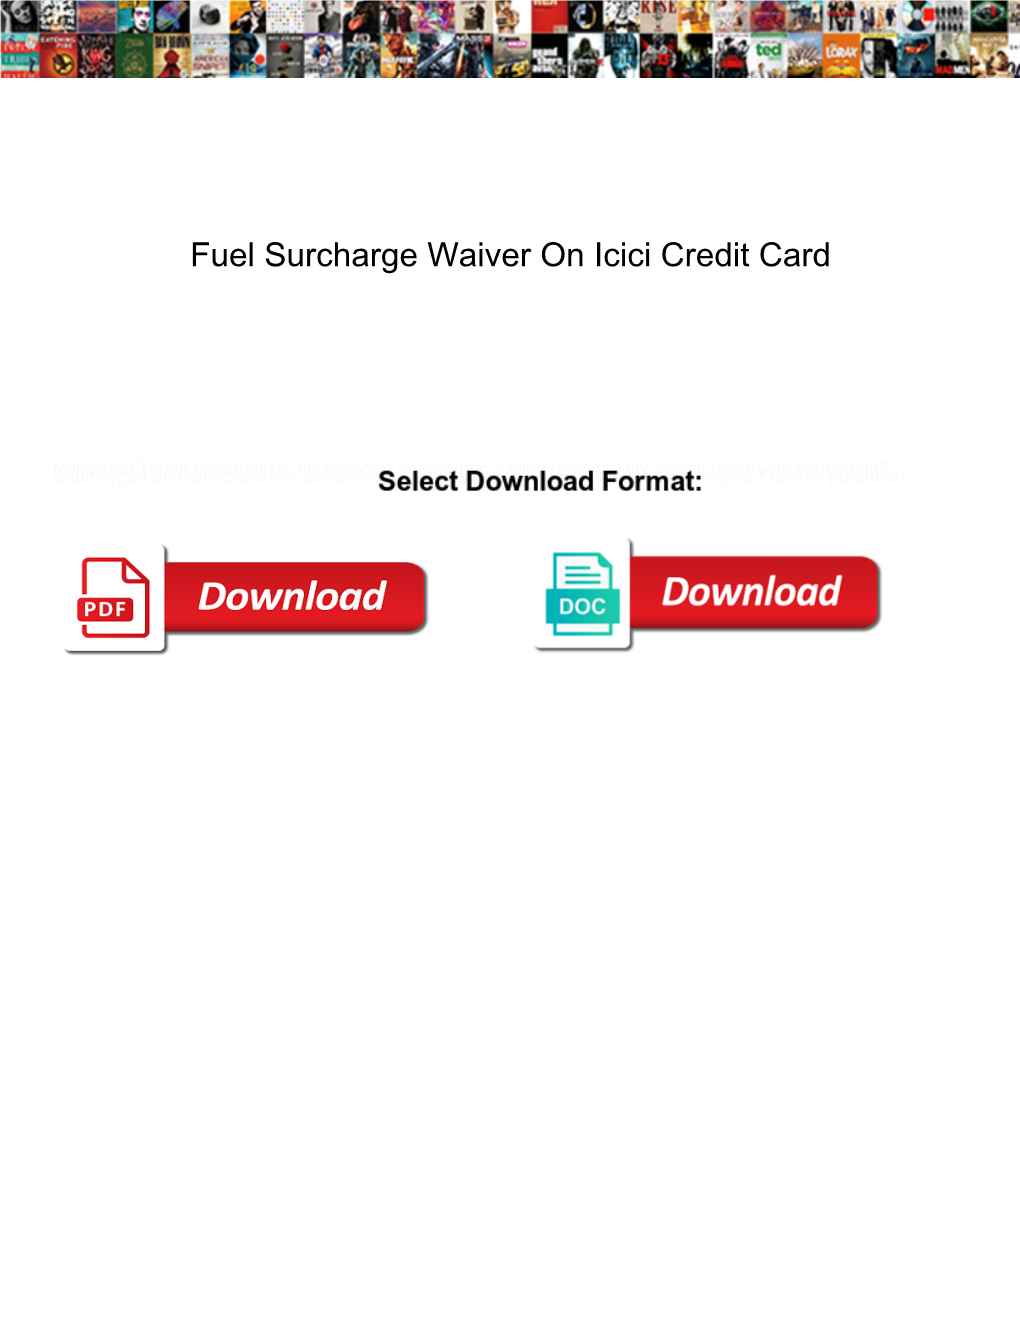 Fuel Surcharge Waiver on Icici Credit Card